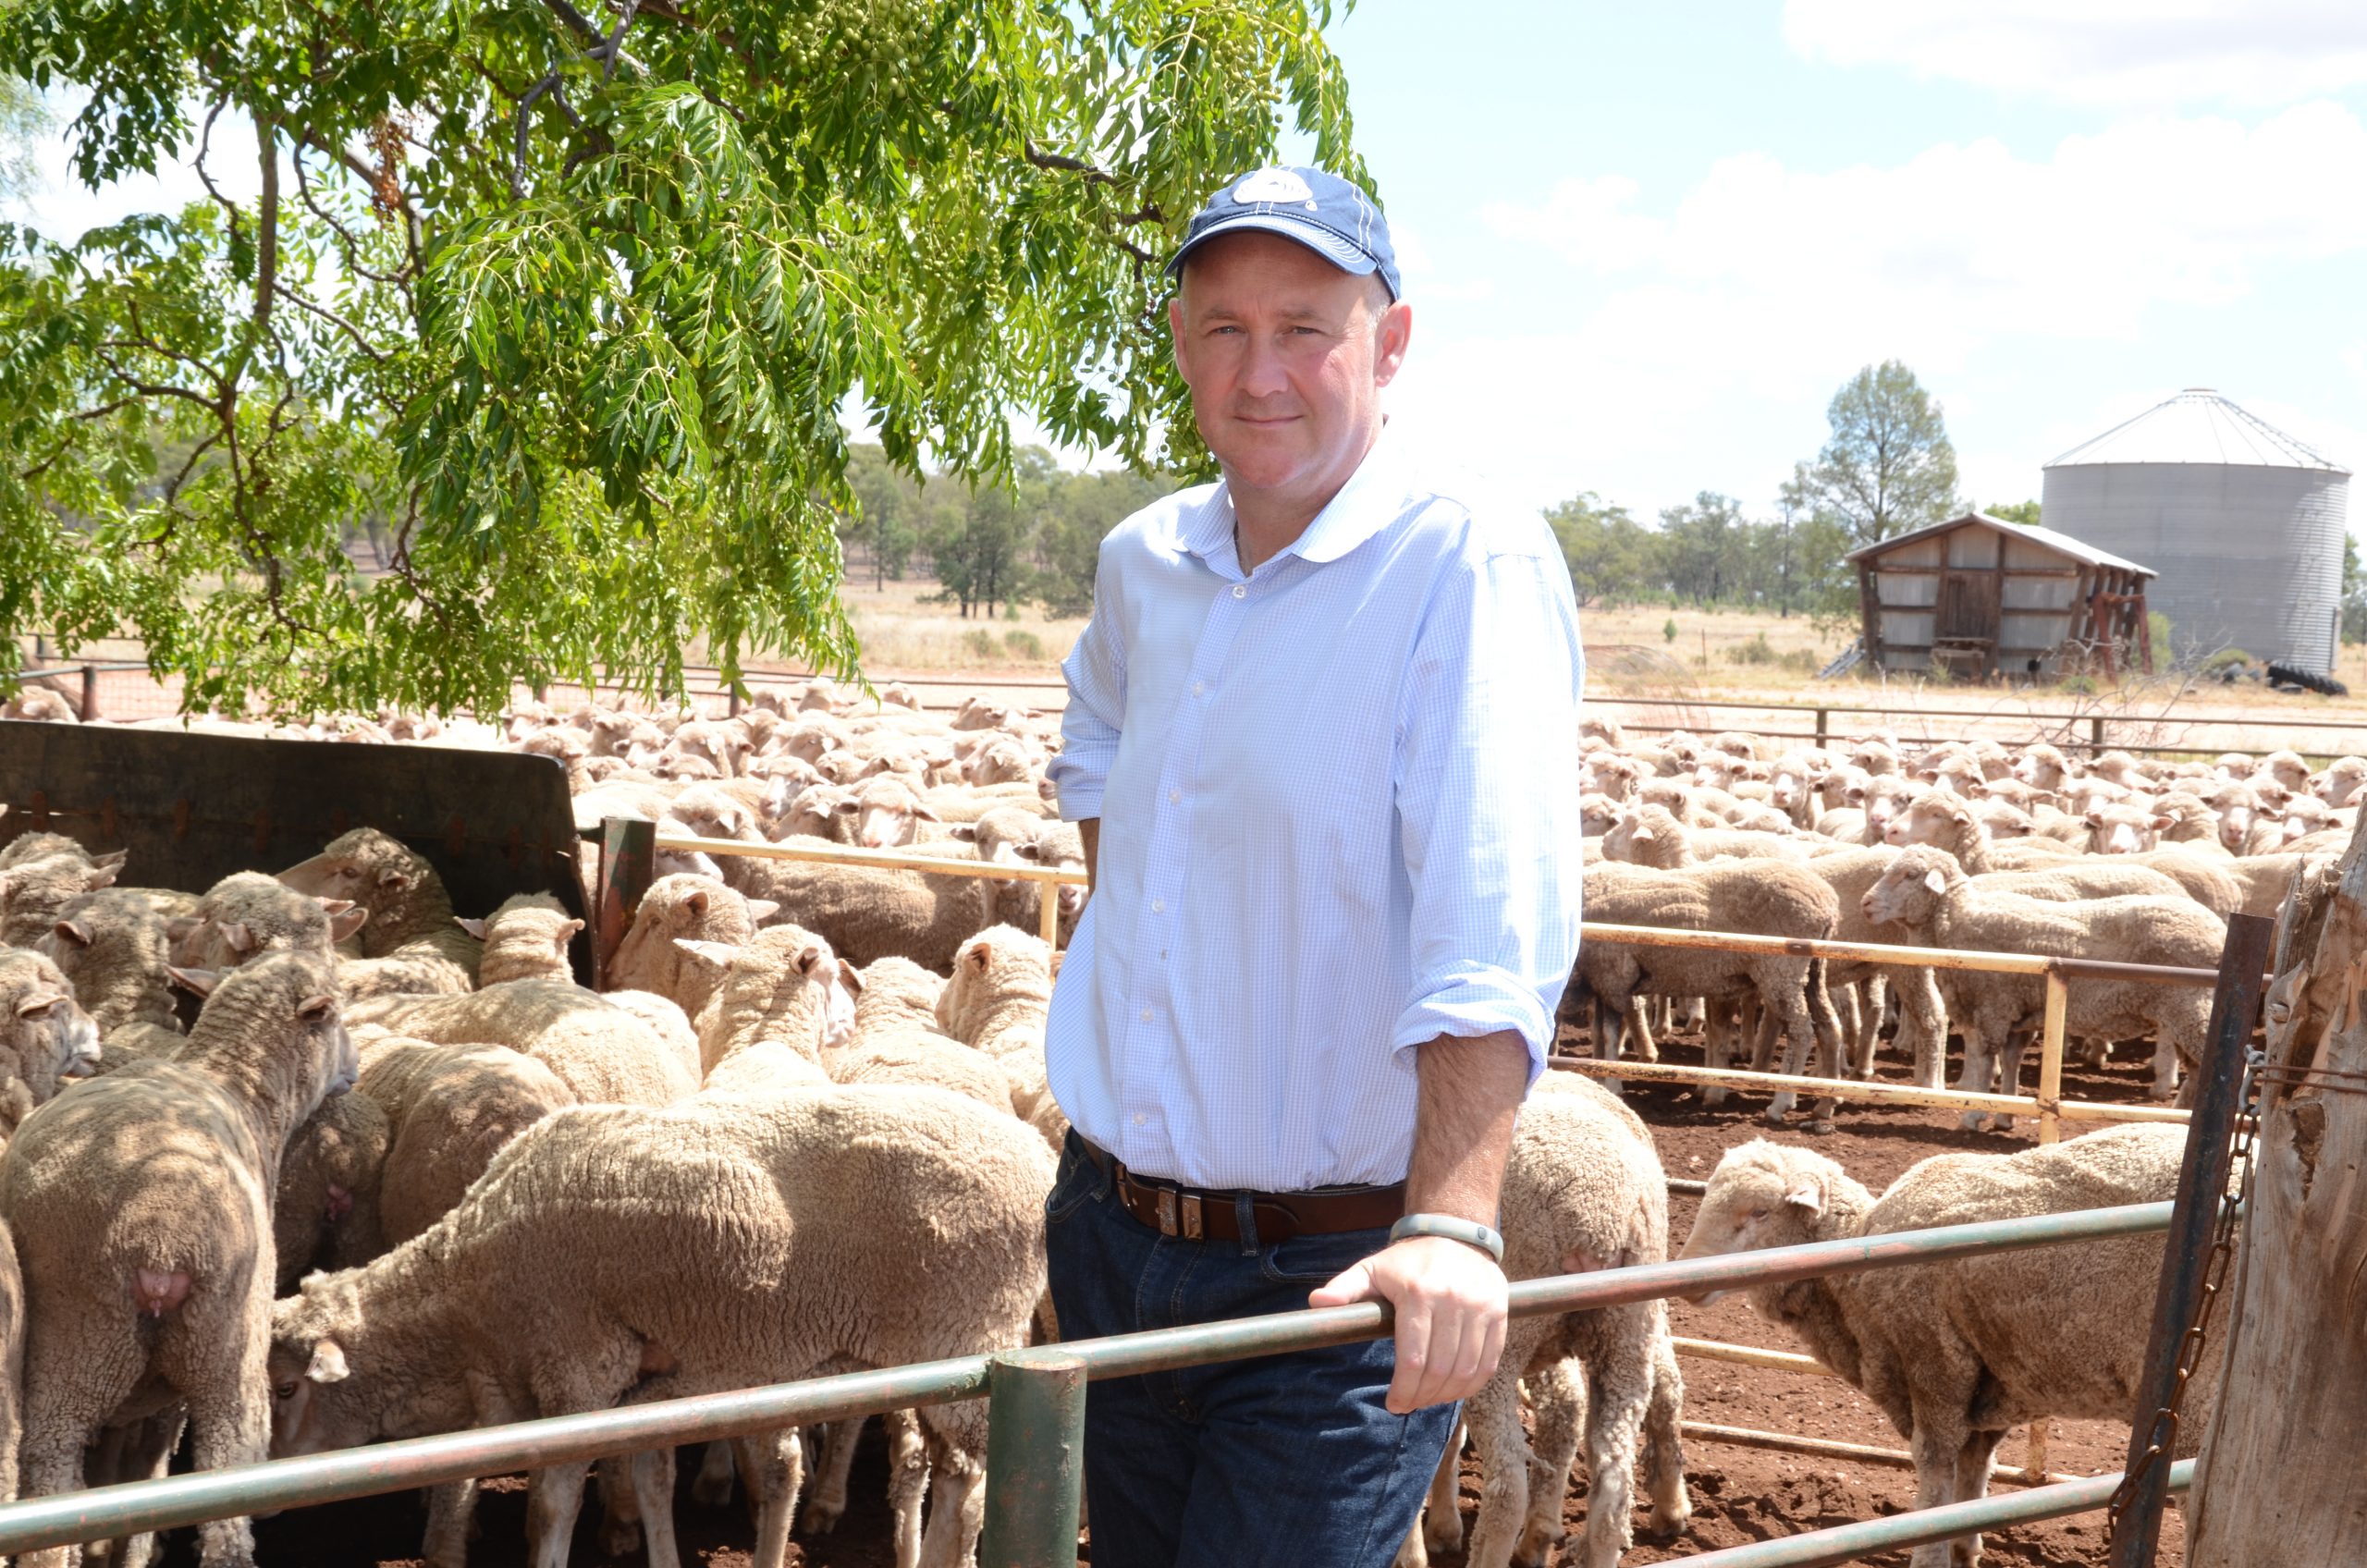 Traditional Markets for Australian Wool to Bounce Back